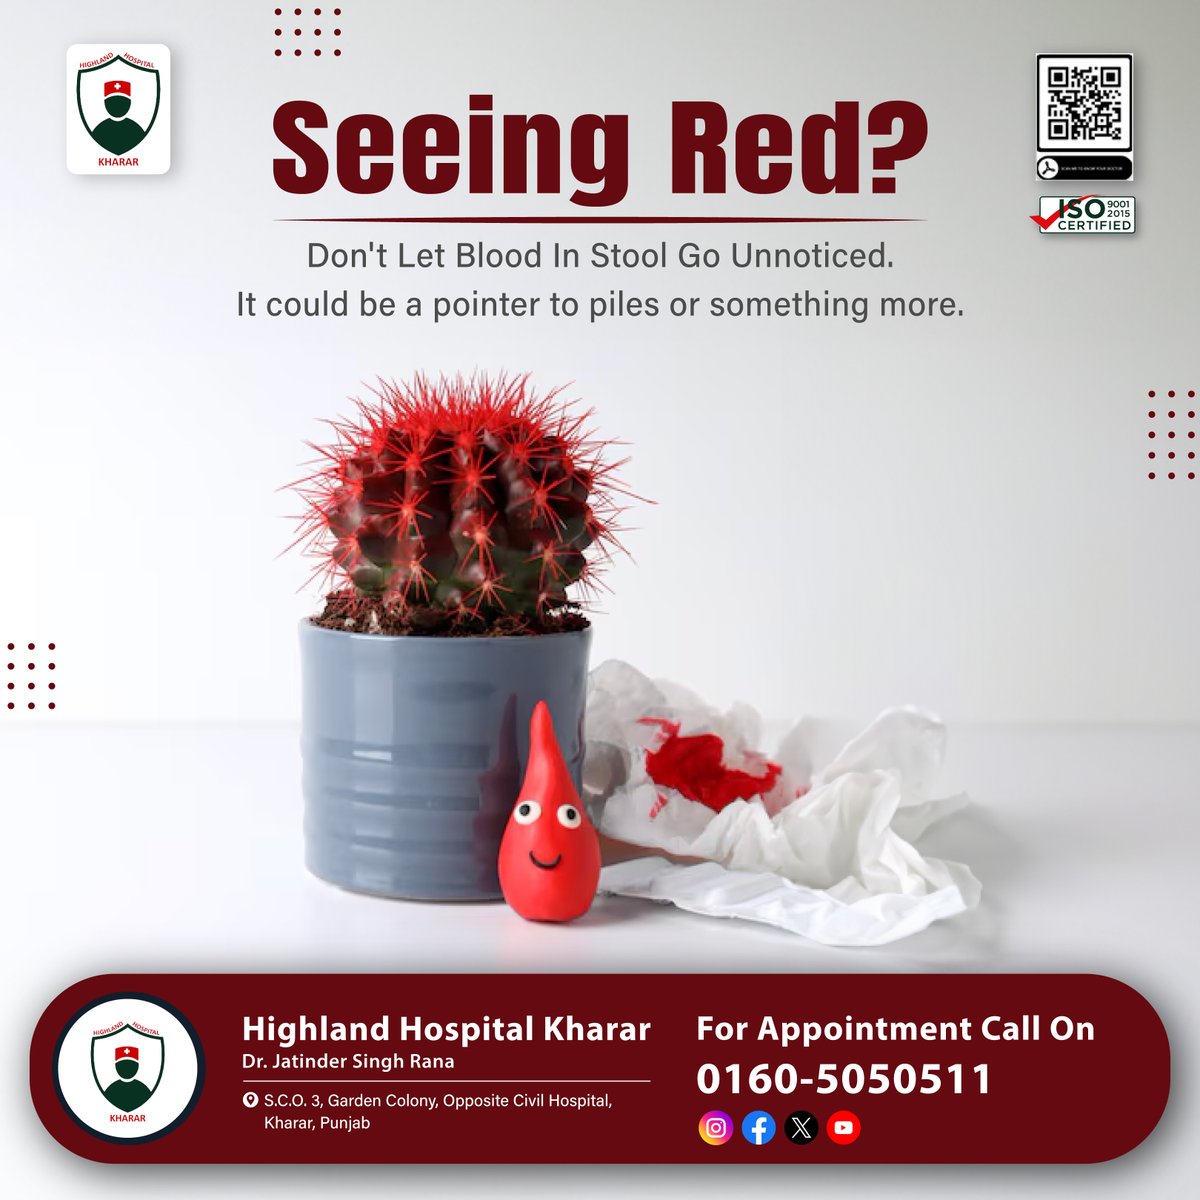 Seeing red can be alarming, especially when it's unexpected. It could be a sign of something serious. At #HighlandHospitalKharar, we're here to help. Don't ignore, explore!
.
#Kharar #Mohali #DrJatinderSingh #Besthospital #piles #fistula #bawasir #Healthcare #SeeingRed